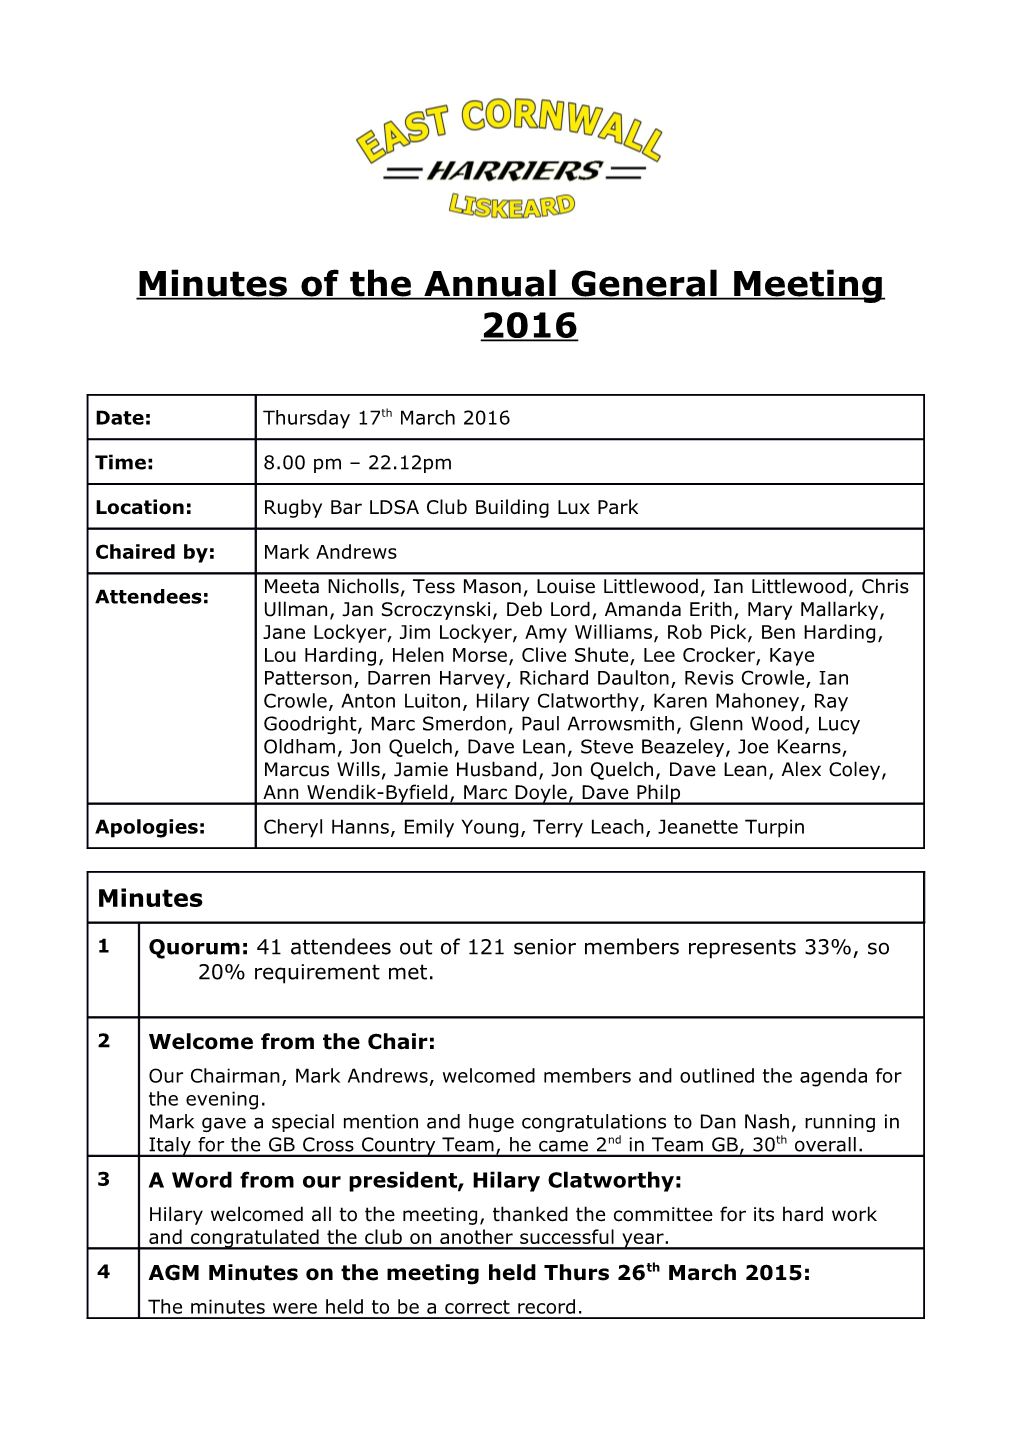 Minutes of the Annual General Meeting 2016